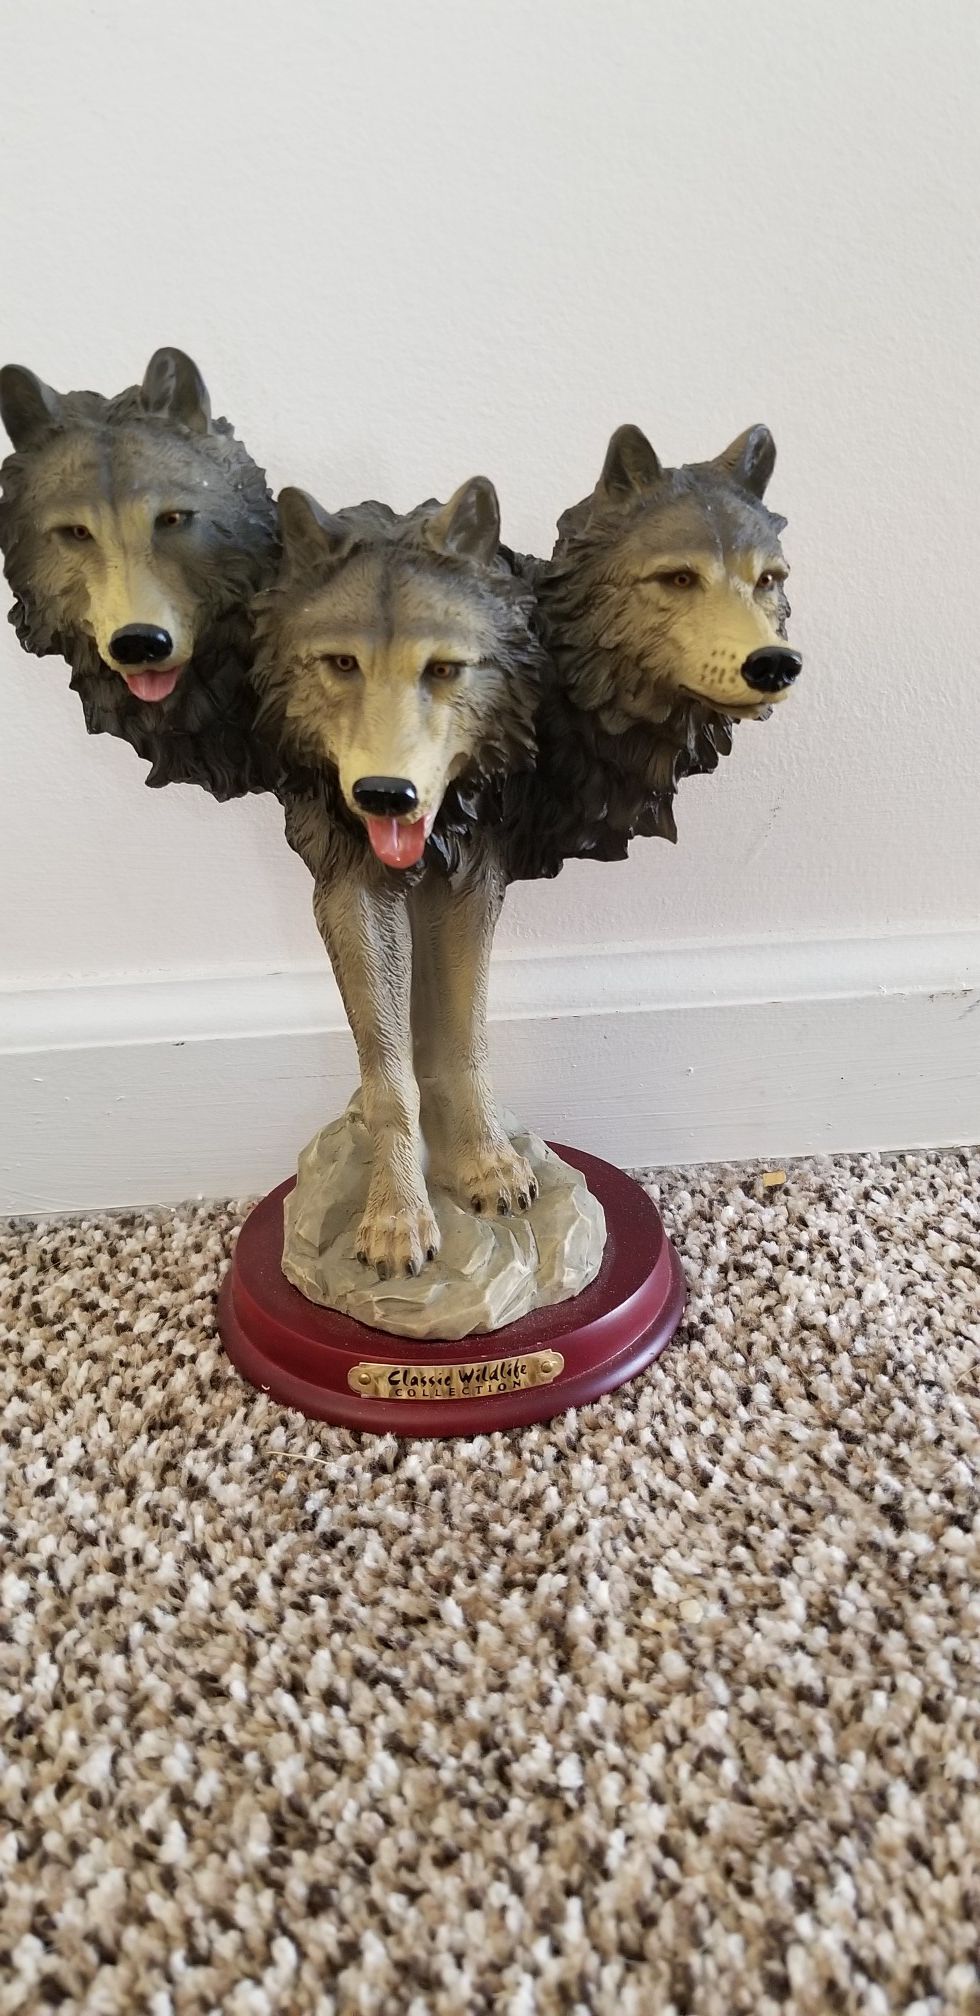 Classic wildlife collection wolf statue